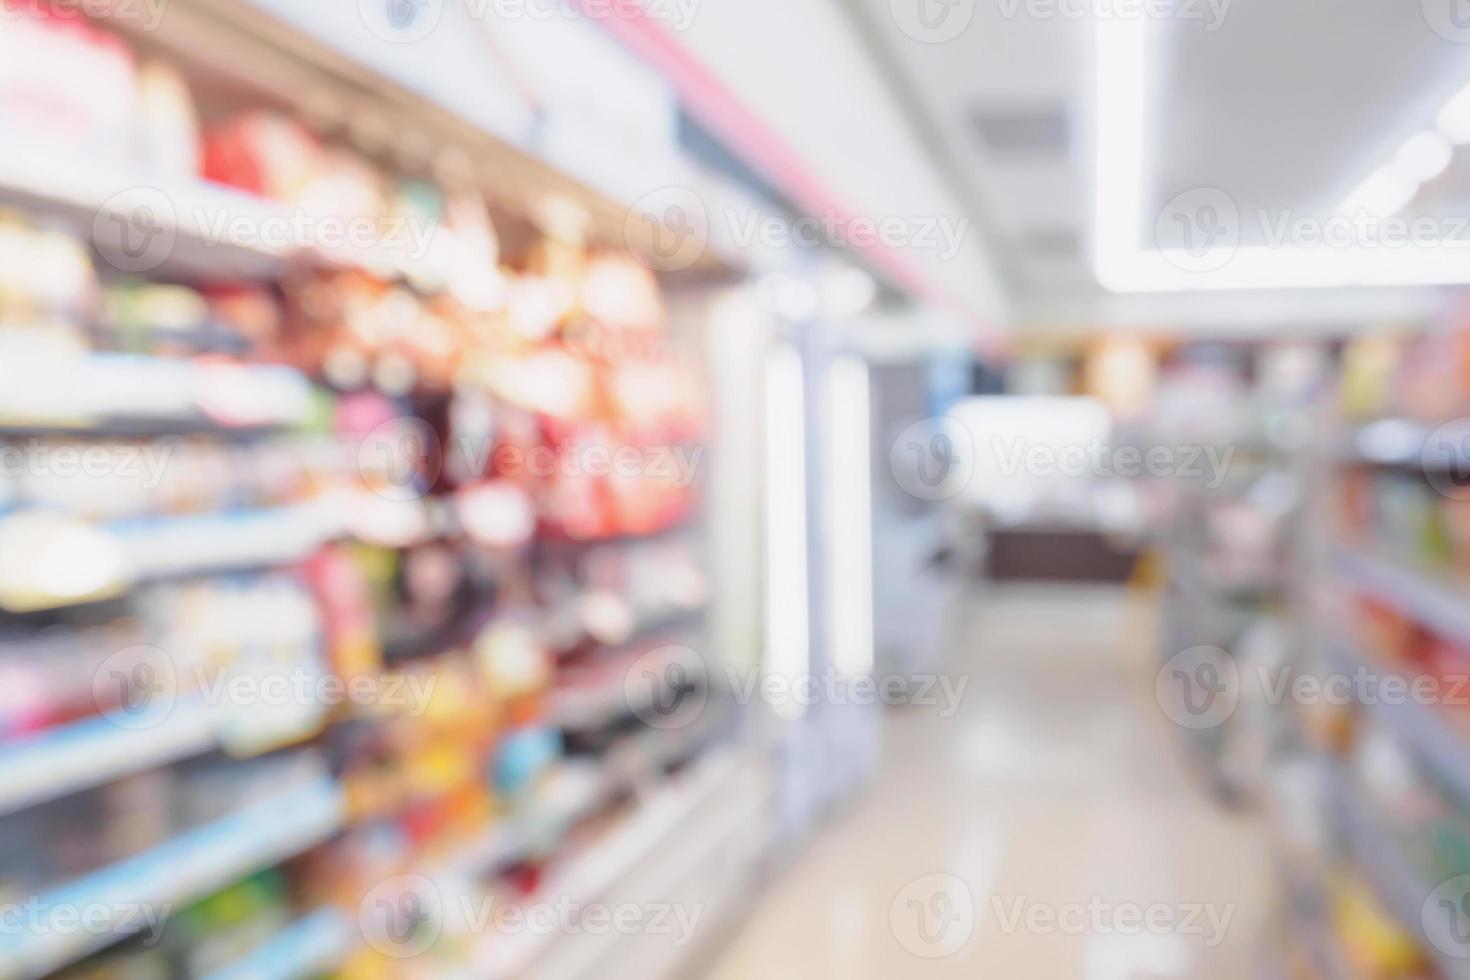 blur refrigerator of food and dairy products shelves in supermarket convenience store background photo